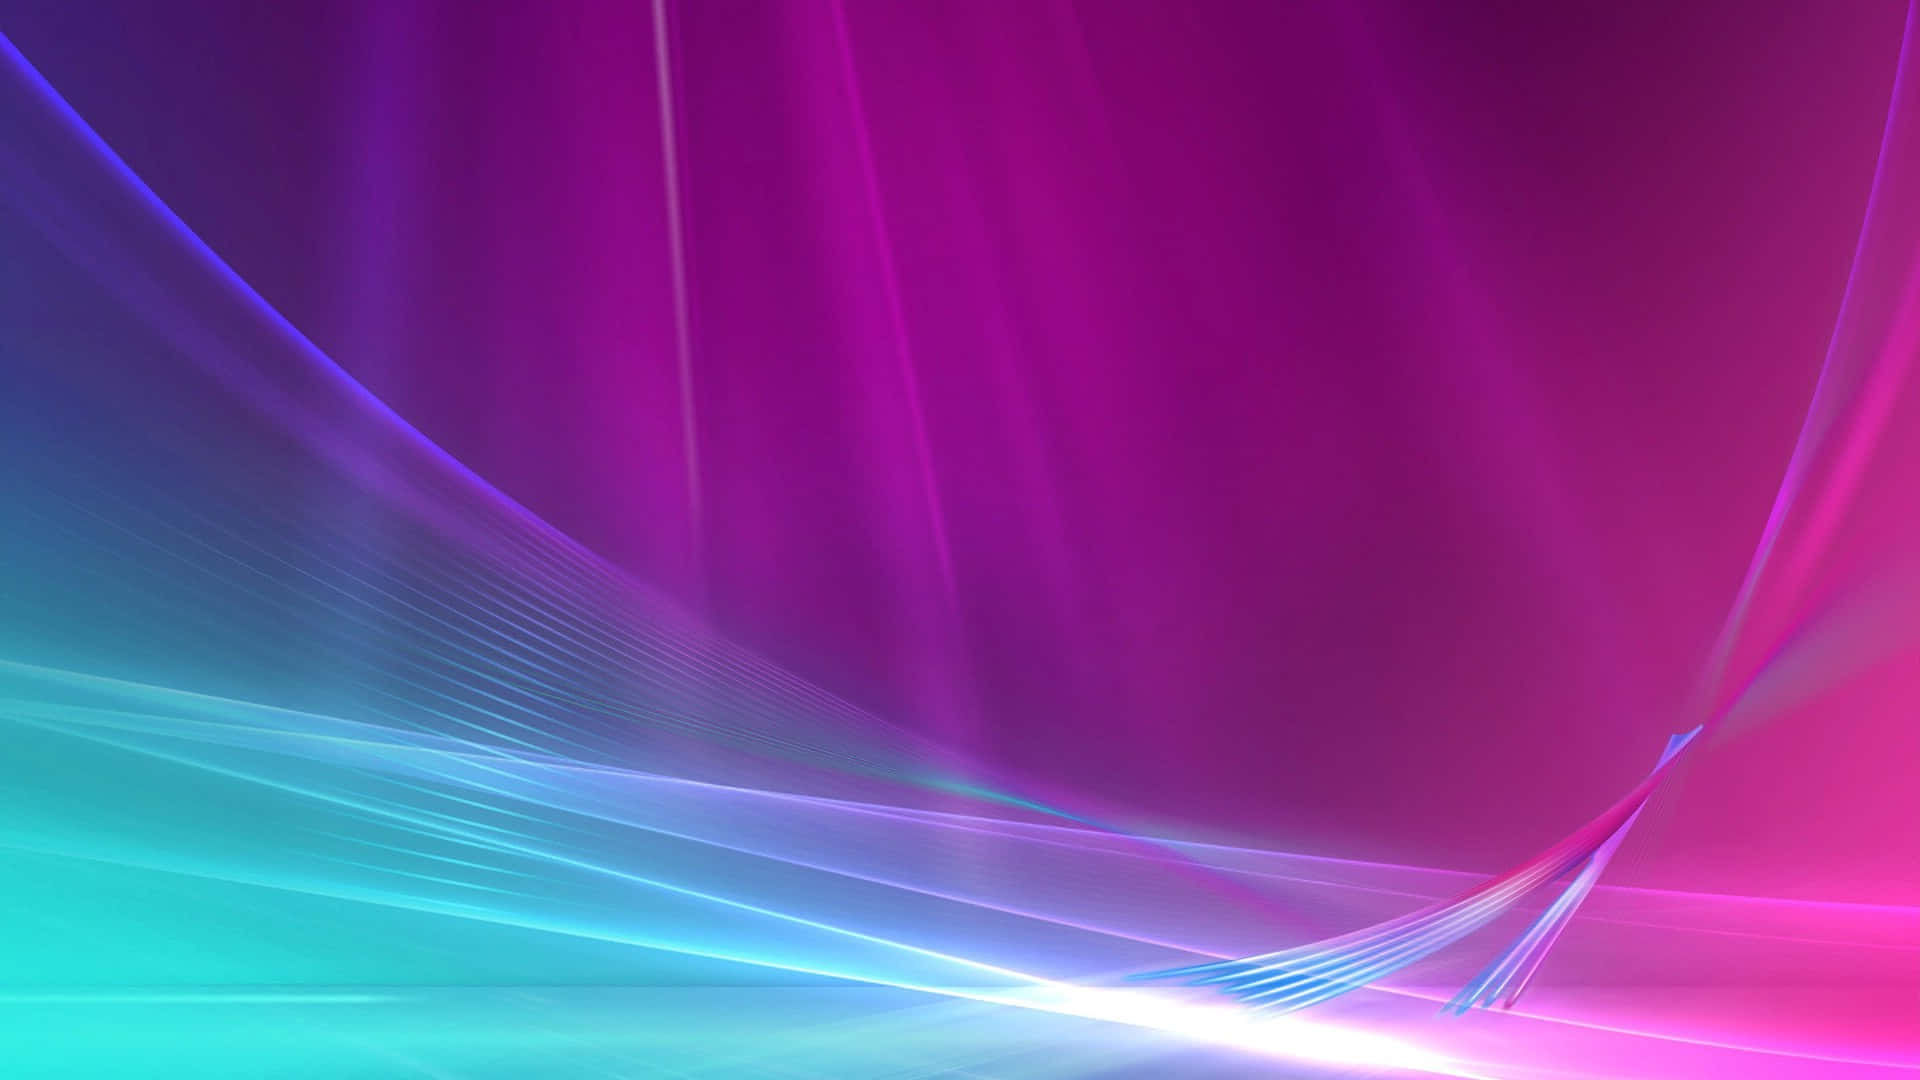 a purple and blue background with a wave